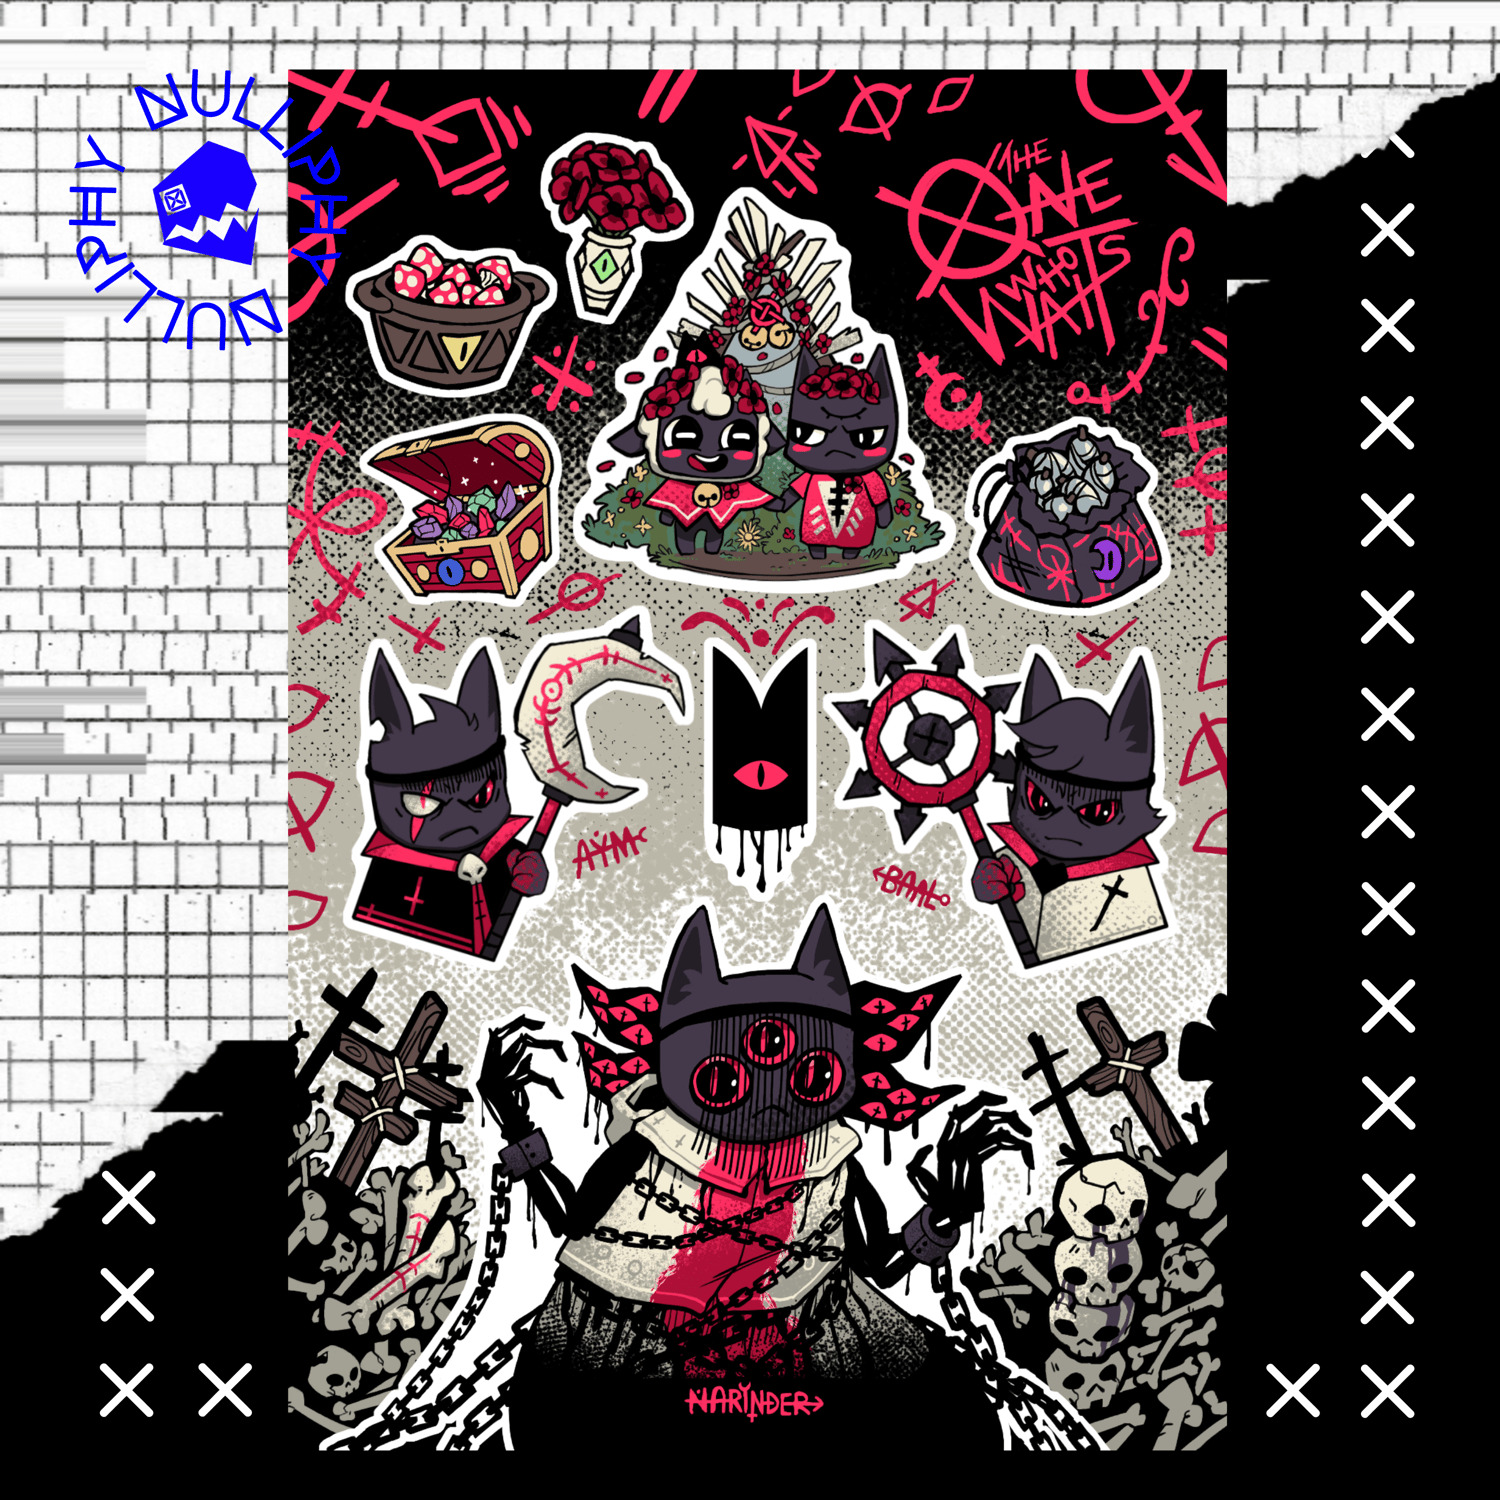 The One Who Waits - Cult of the Lamb Sticker Sheet